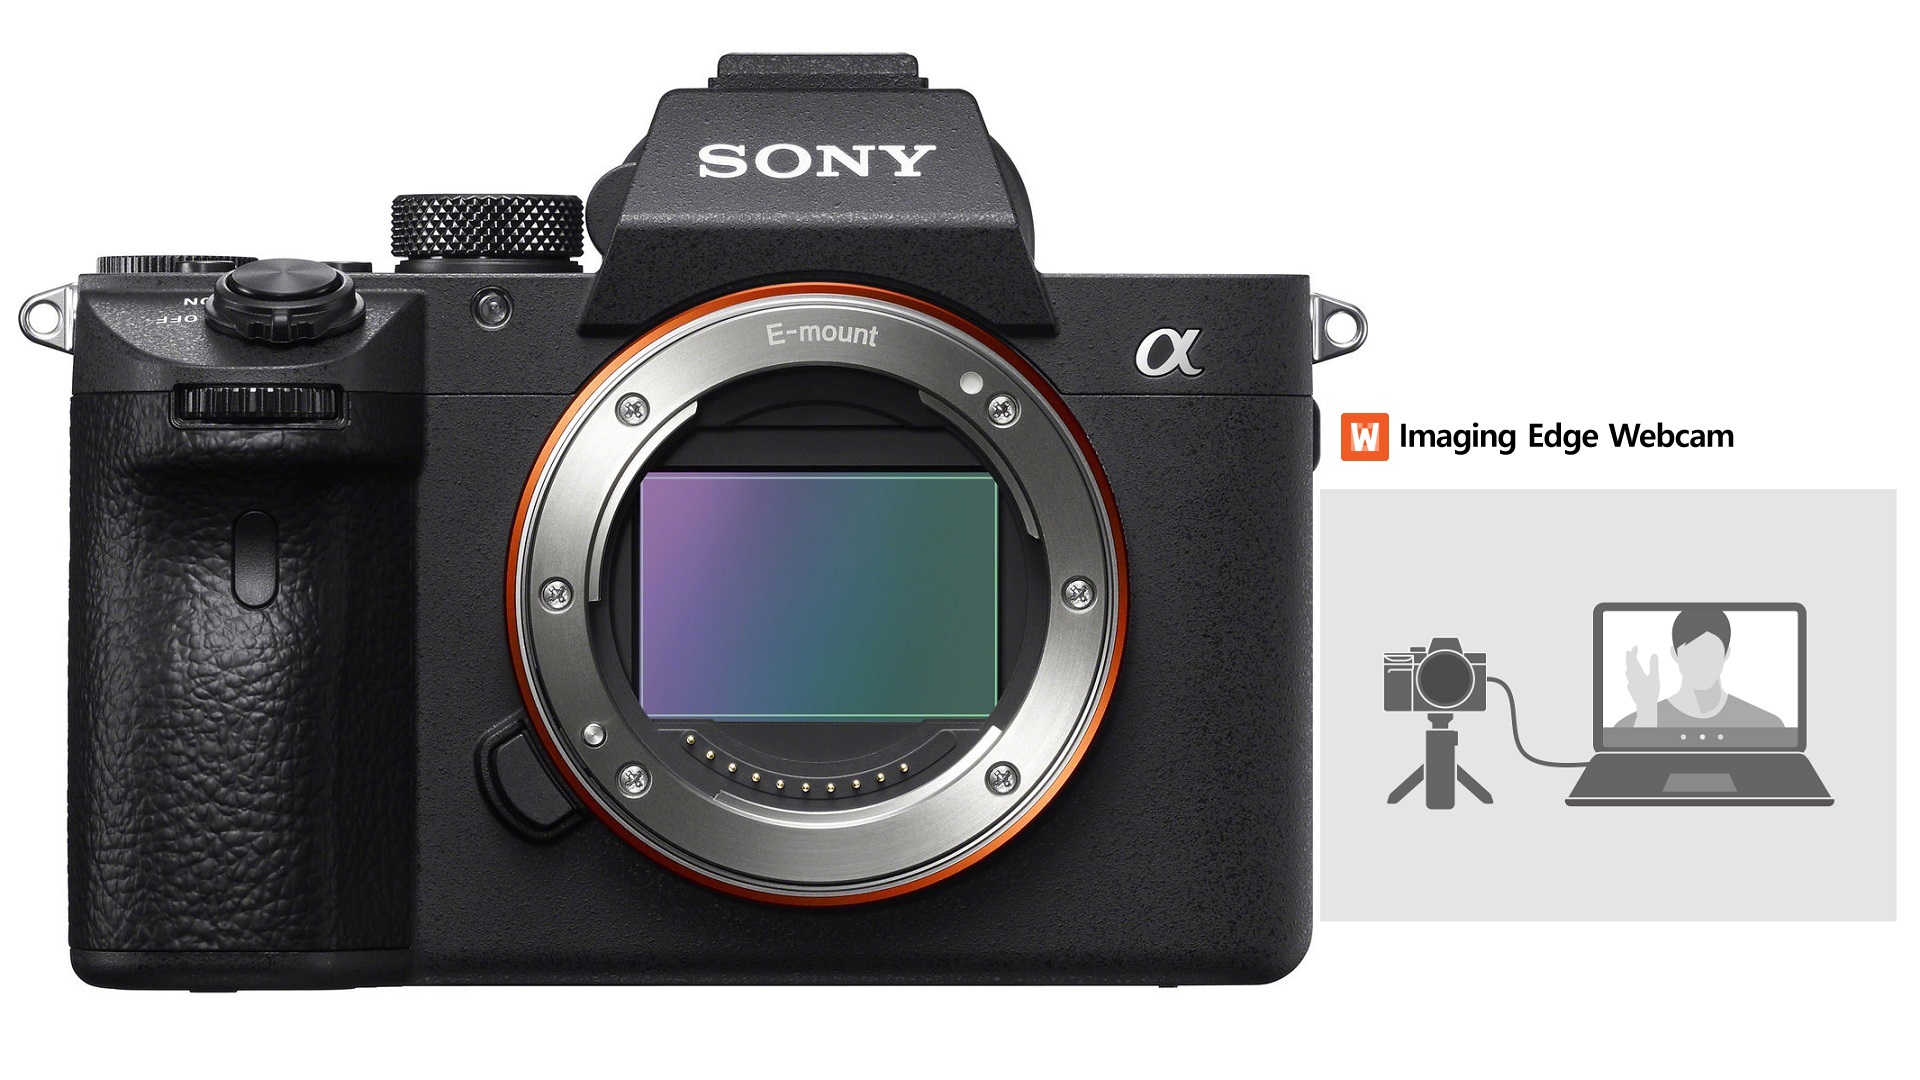 Sony Imaging Edge Webcam Released - Turns Compatible Sony Cameras ...